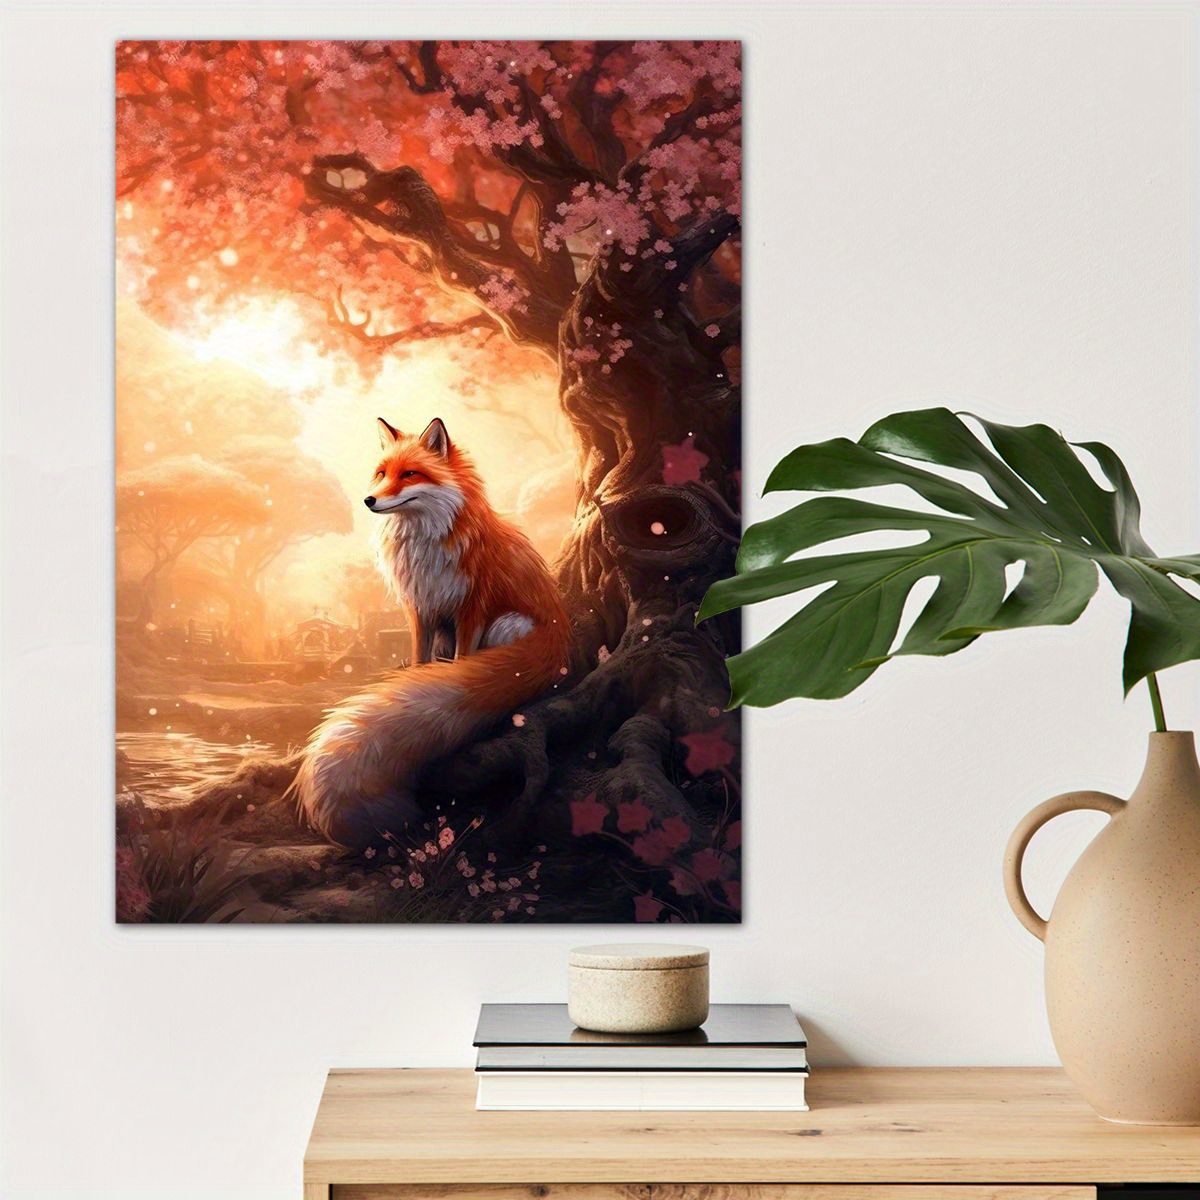 

1pc Cherry Fox Poster Canvas Wall Art For Home Decor, Animal Lovers Poster Wall Decor High Quality Canvas Prints For Living Room Bedroom Kitchen Office Cafe Decor, Perfect Gift And Decoration